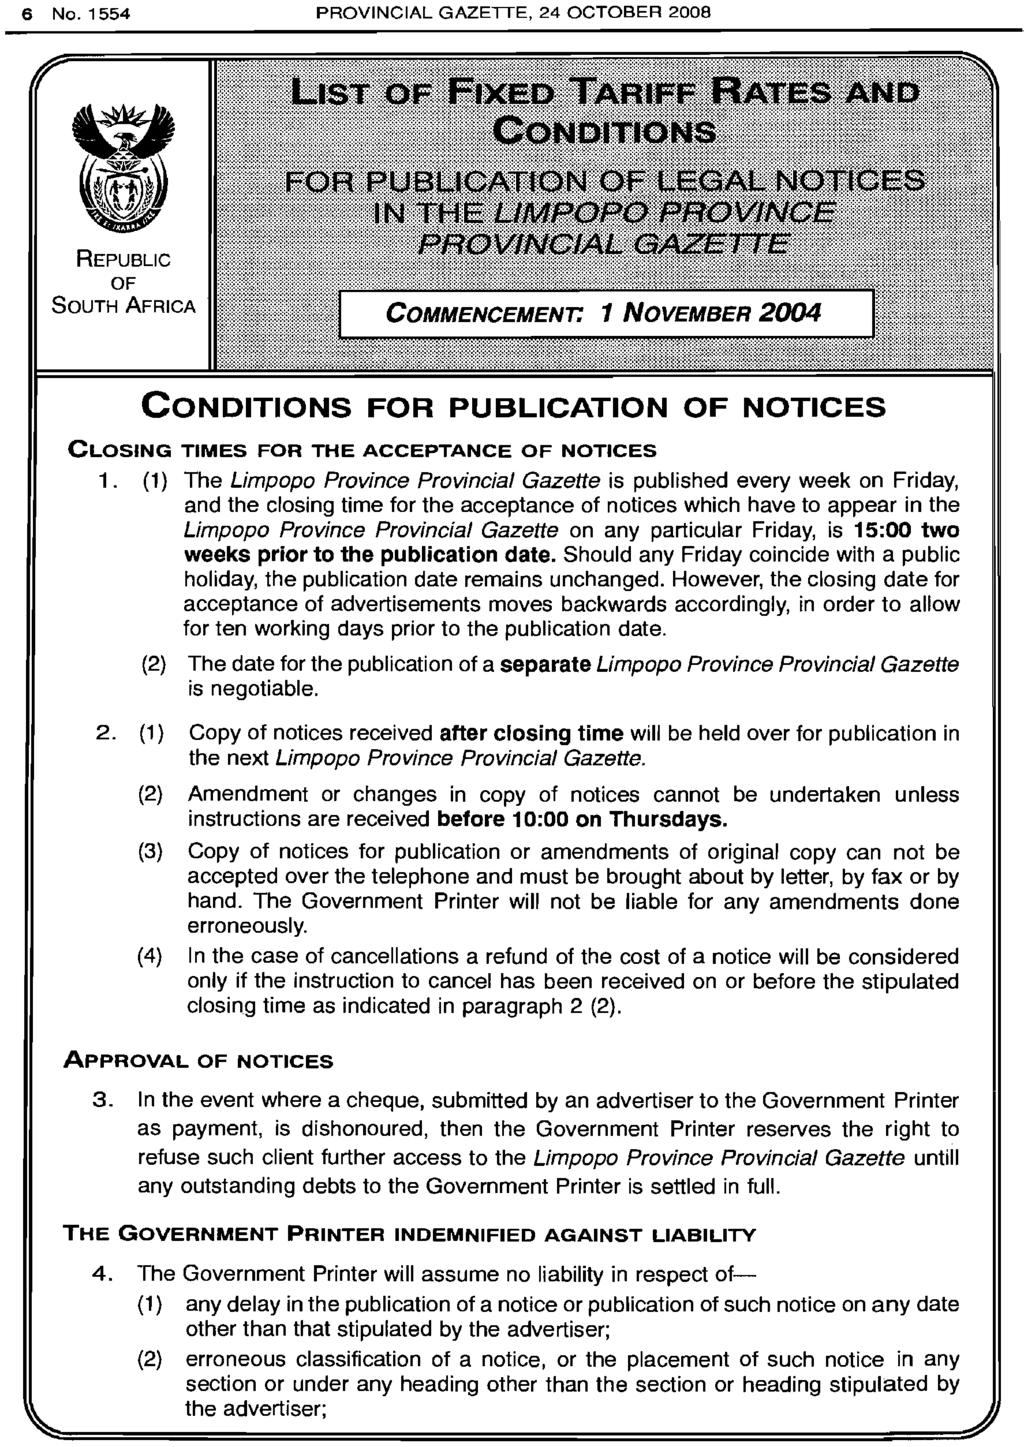 6 No.1554 PROVINCIAL GAZETTE, 24 OCTOBER 2008 REPUBLIC OF SOUTH AFRICA CONDITIONS FOR PUBLICATION OF NOTICES CLOSING TIMES FOR THE ACCEPTANCE OF NOTICES 1.